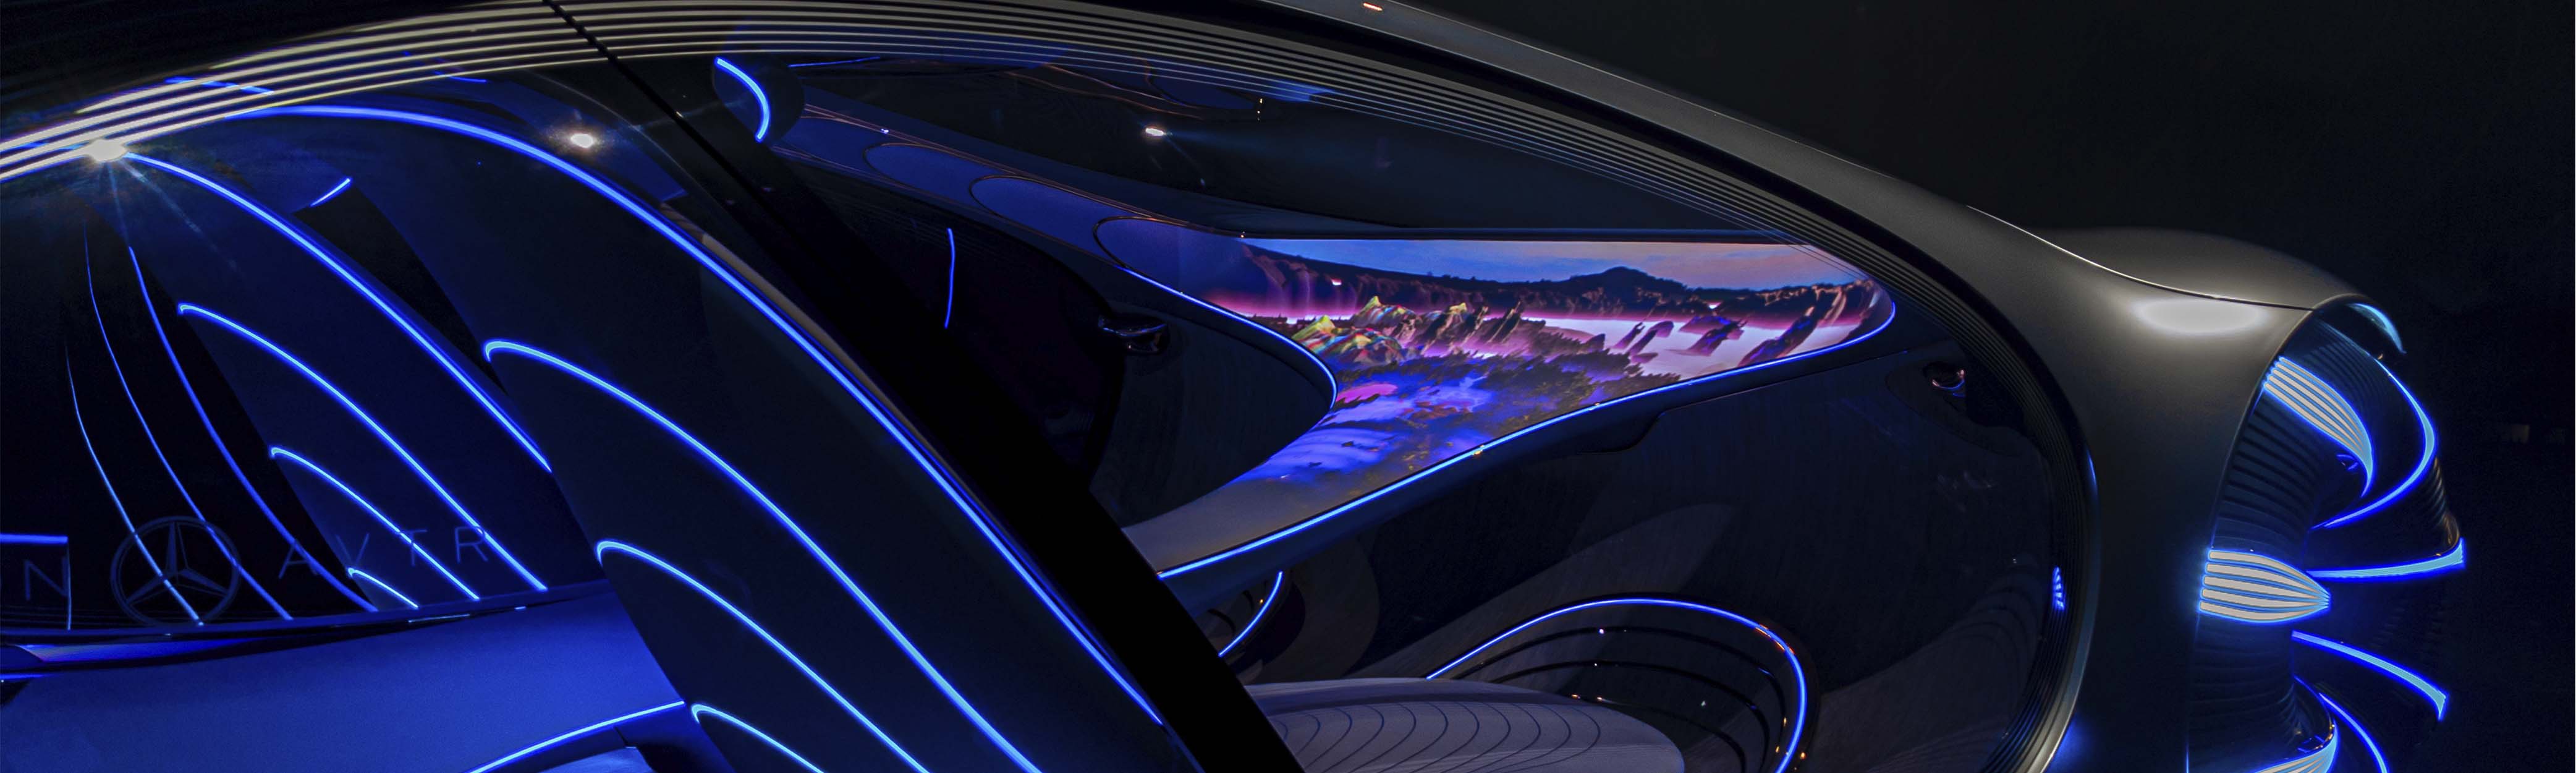 Our favorite in-car displays on display at CES 2022